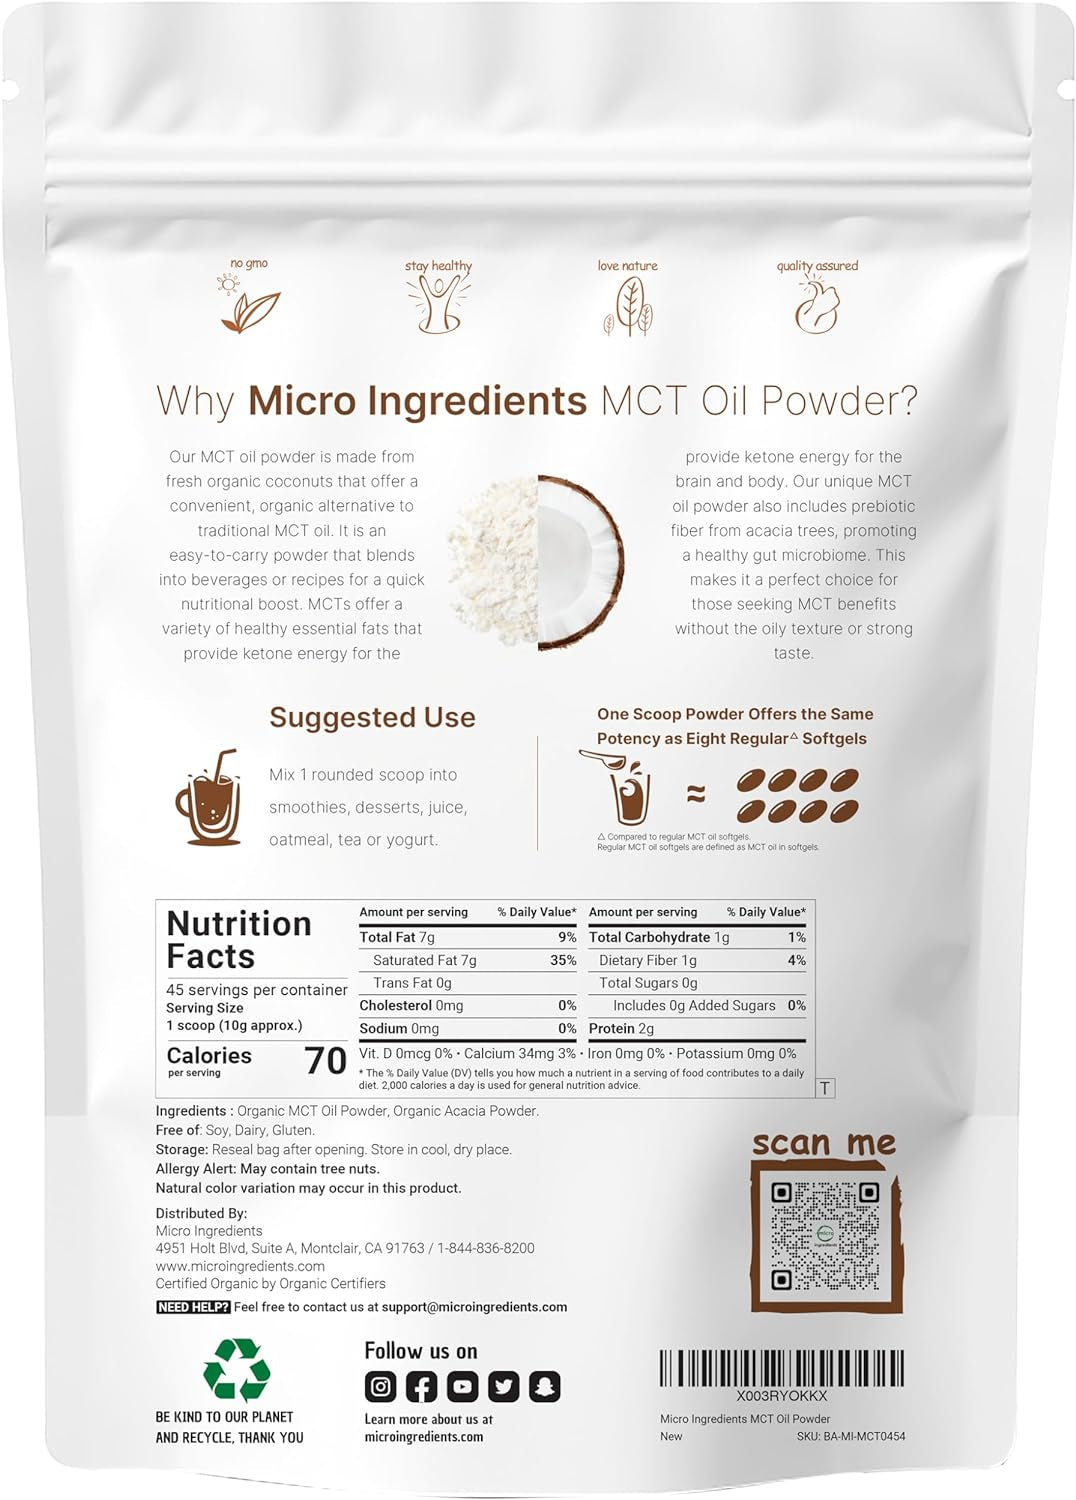 Organic MCT Oil Powder with Prebiotic Fiber,1 Pound(16 Ounce), Fast Fuel for Body and Brain, C8 MCT Oil for Coffee Creamer, No Gmos, Keto Diet, Vegan